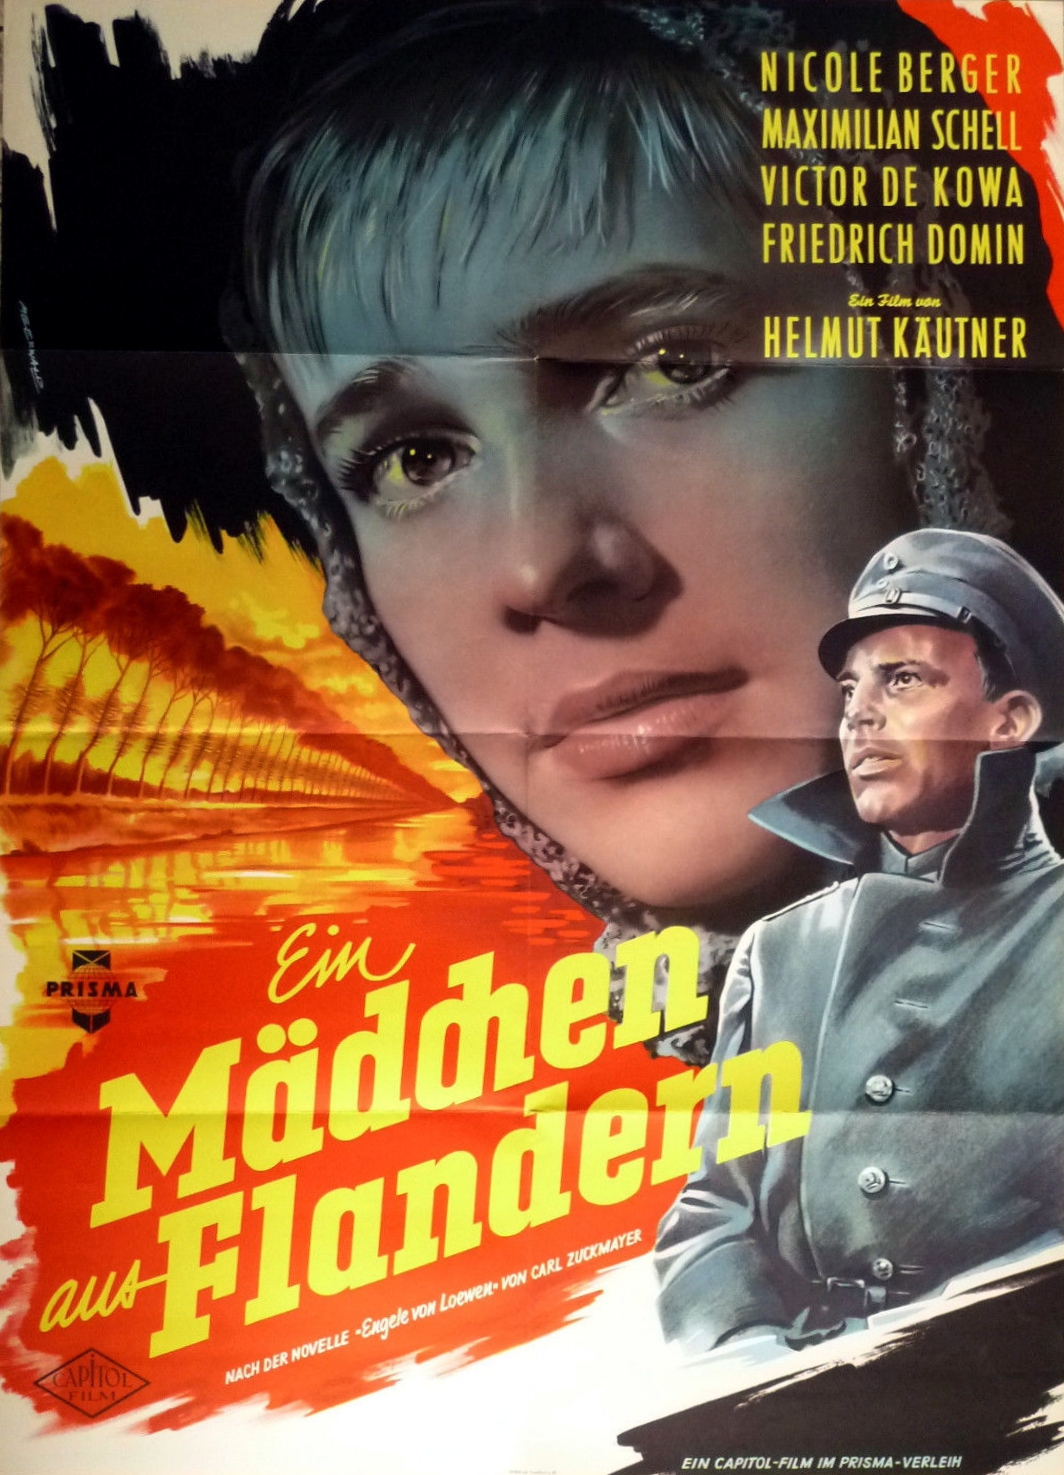 The Girl from Flanders (1956) Screenshot 1 